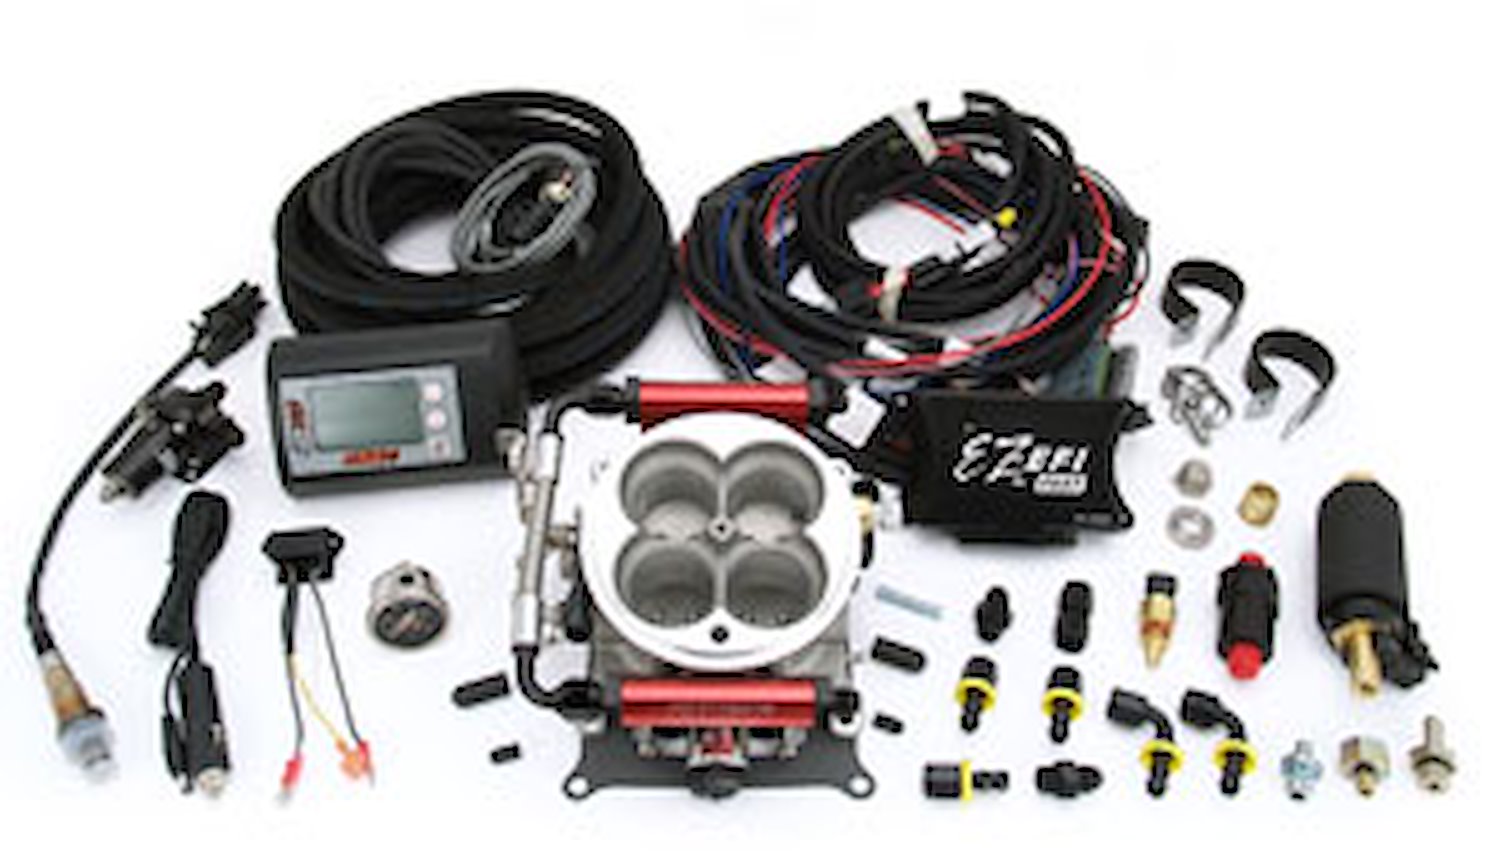 EZ-EFI Self-Tuning Fuel Injection Master Kit Includes: Throttle Body